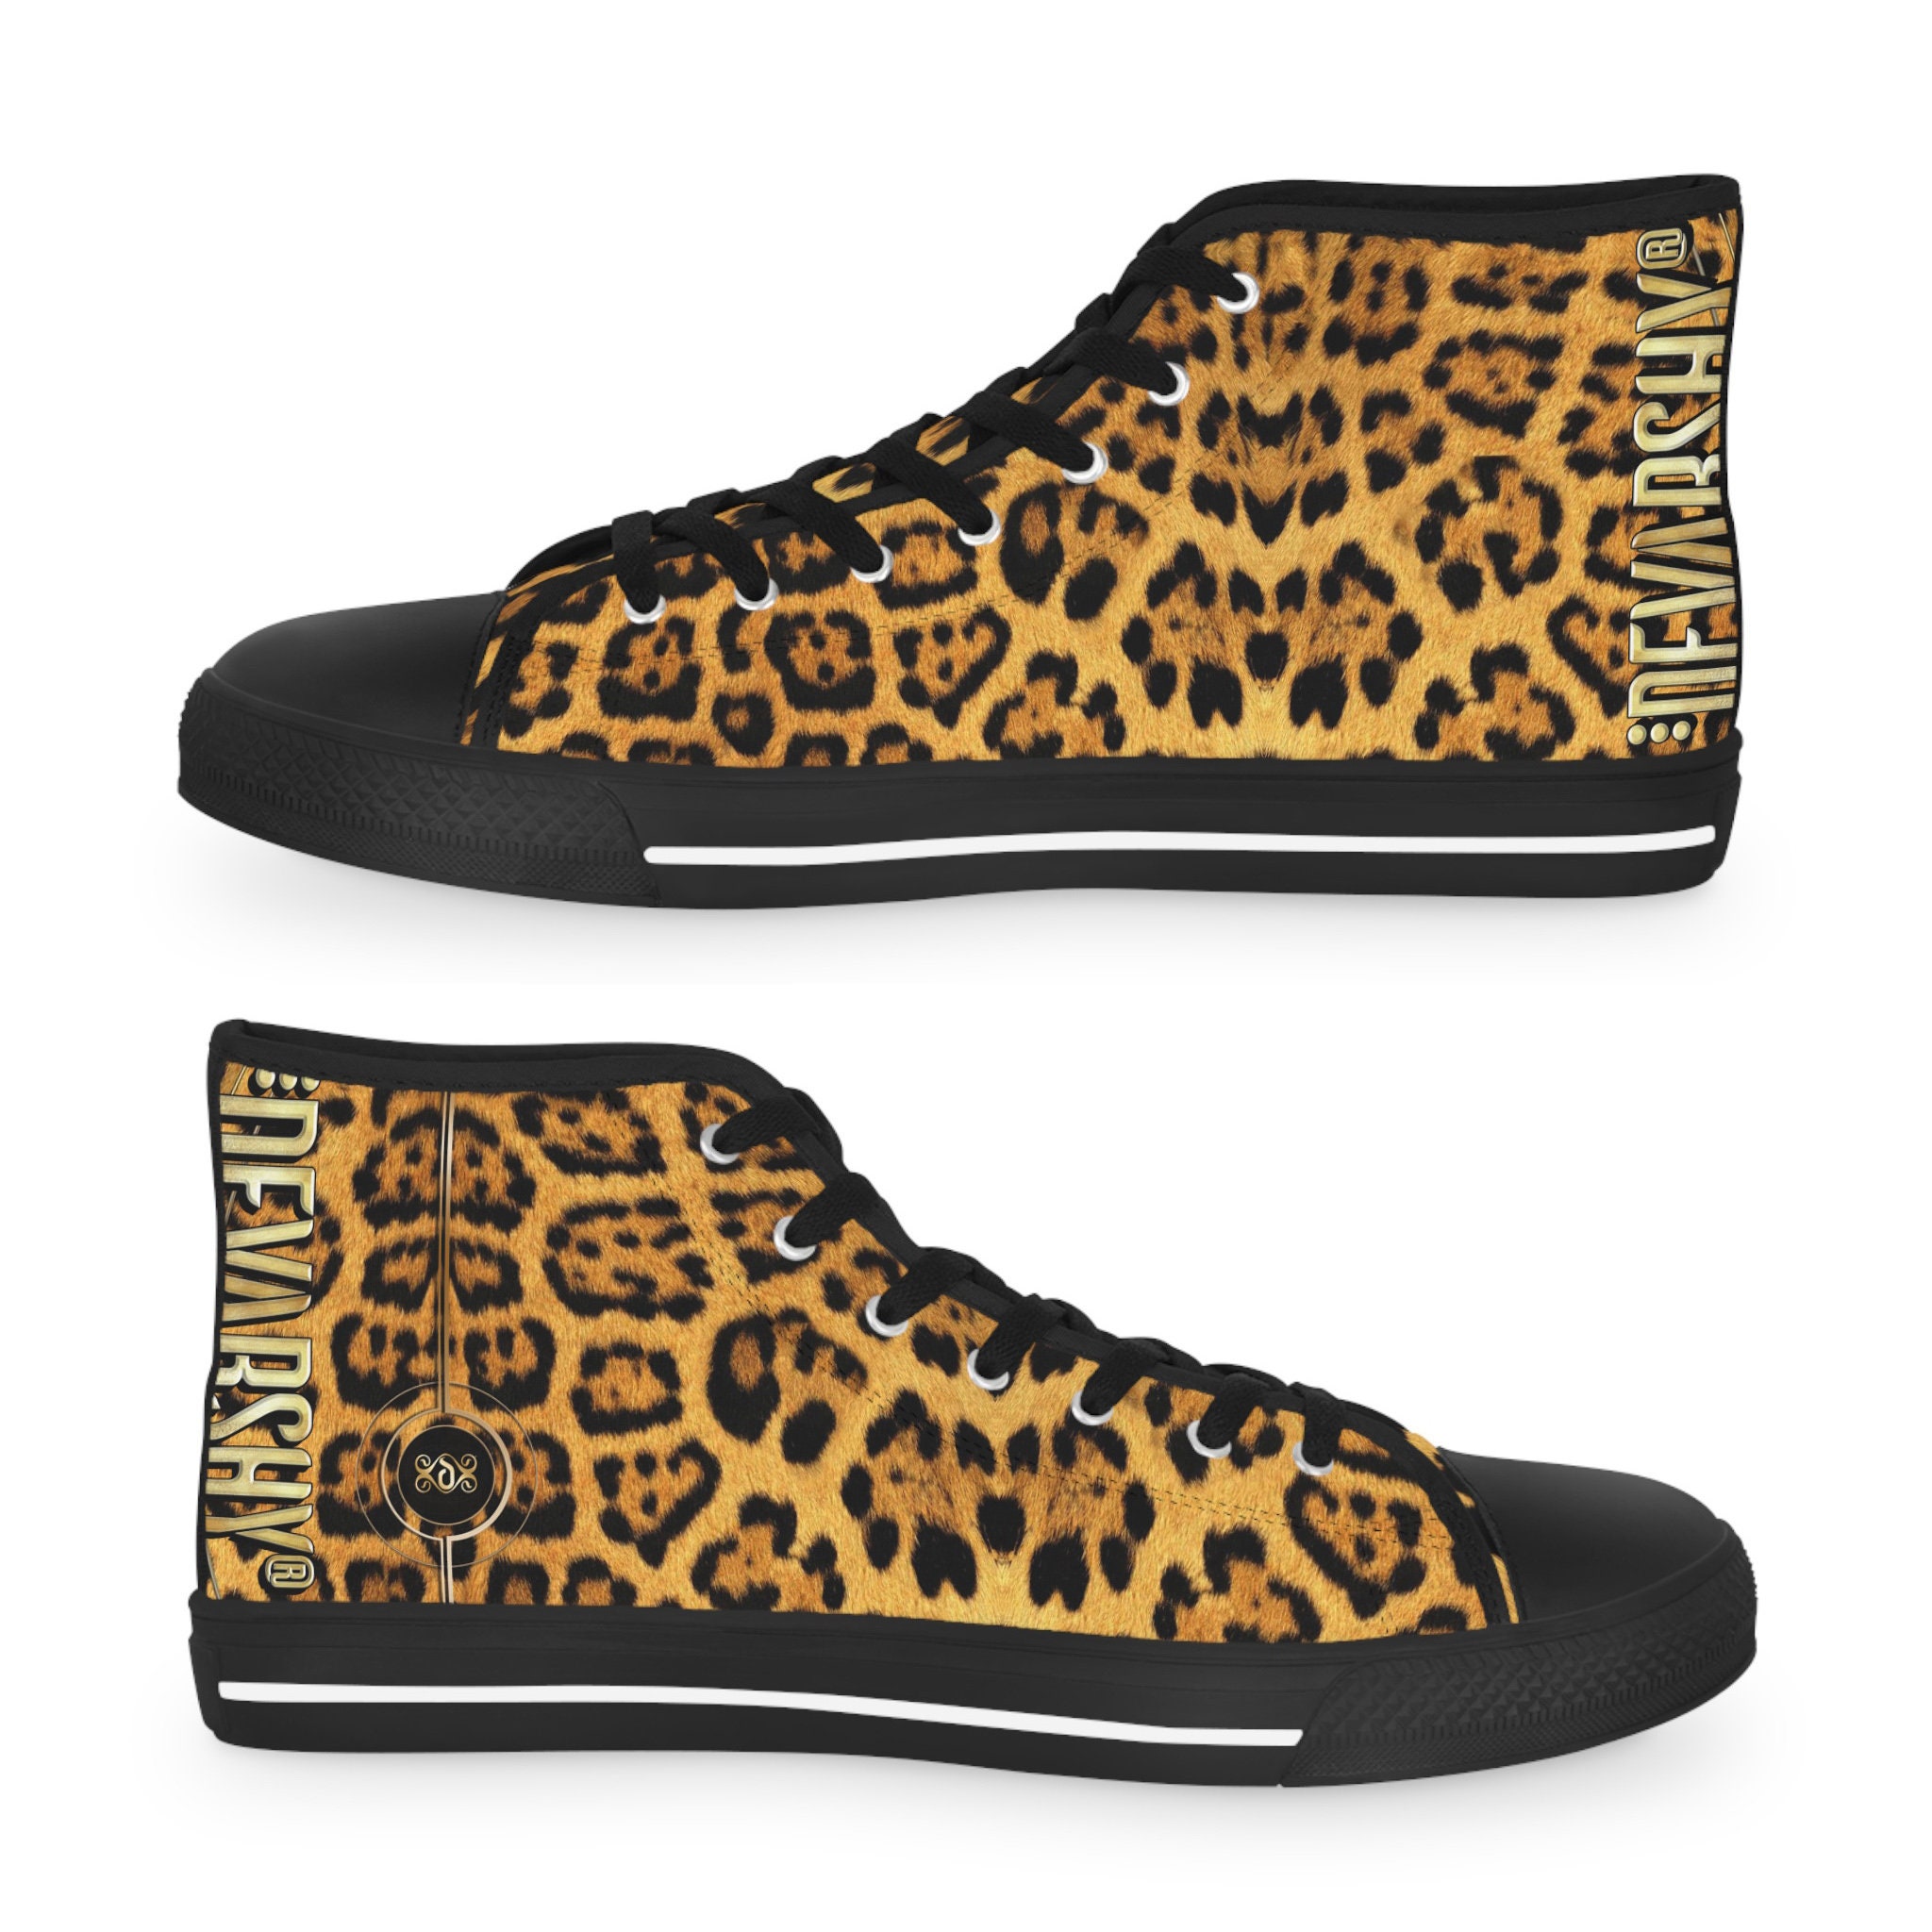 Mens Shoes Versace, Style code: dsu8007-dcl5g-d0141 | Versace mens shoes, Men's  shoes, Versace sneakers